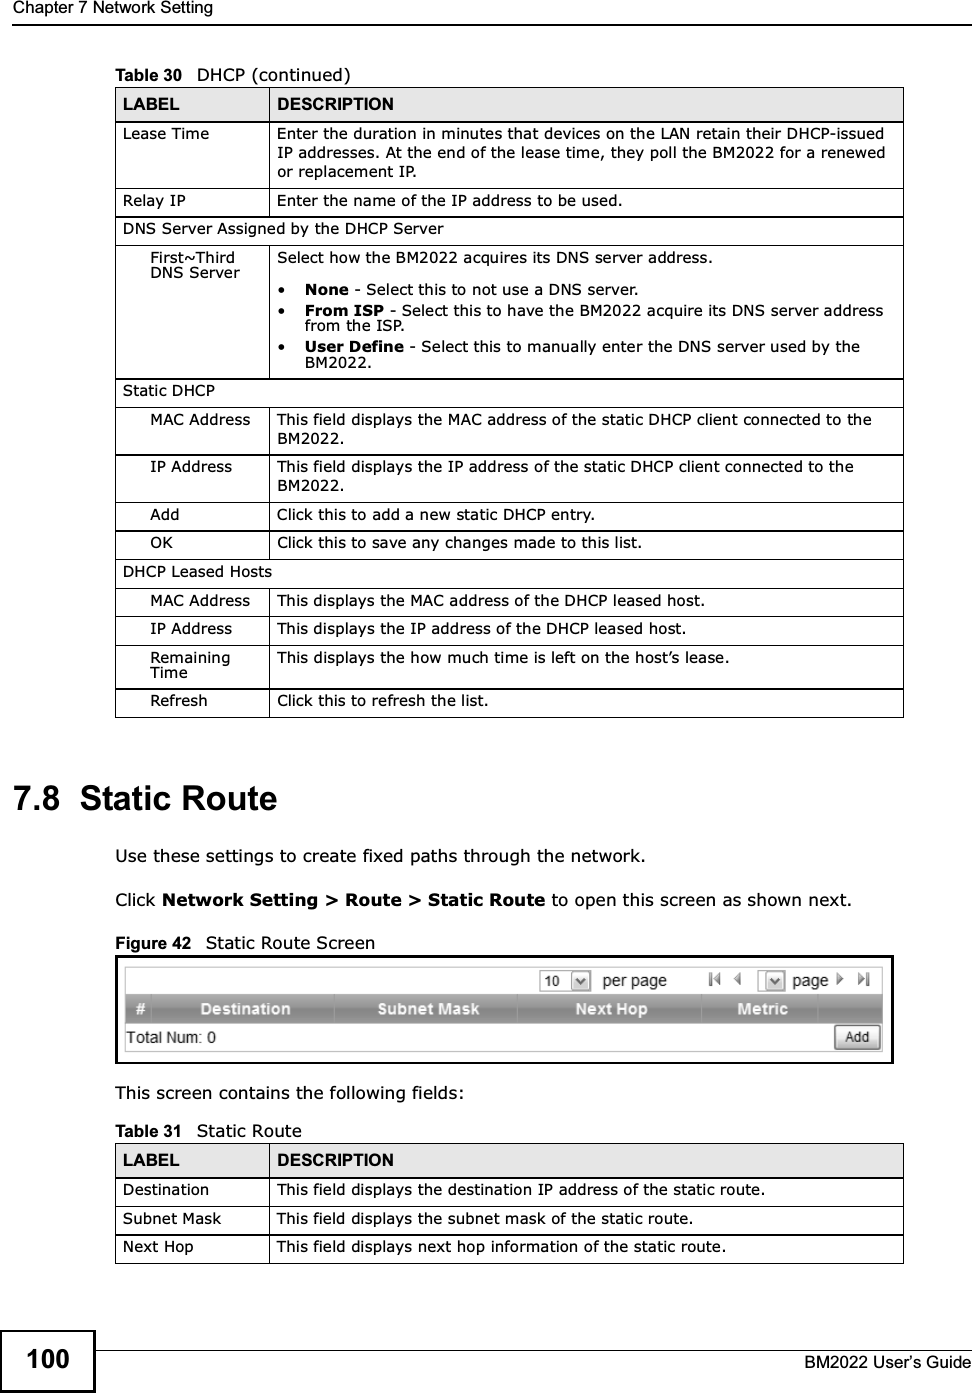 Chapter 7 Network SettingBM2022 Users Guide1007.8  Static RouteUse these settings to create fixed paths through the network.Click Network Setting &gt; Route &gt; Static Route to open this screen as shown next.Figure 42   Static Route ScreenThis screen contains the following fields:Lease Time Enter the duration in minutes that devices on the LAN retain their DHCP-issued IP addresses. At the end of the lease time, they poll the BM2022 for a renewed or replacement IP.Relay IP Enter the name of the IP address to be used.DNS Server Assigned by the DHCP ServerFirst~Third DNS ServerSelect how the BM2022 acquires its DNS server address.None - Select this to not use a DNS server.From ISP - Select this to have the BM2022 acquire its DNS server address from the ISP.User Define - Select this to manually enter the DNS server used by the BM2022.Static DHCPMAC Address This field displays the MAC address of the static DHCP client connected to the BM2022.IP Address This field displays the IP address of the static DHCP client connected to the BM2022.Add Click this to add a new static DHCP entry.OK Click this to save any changes made to this list.DHCP Leased HostsMAC Address This displays the MAC address of the DHCP leased host.IP Address This displays the IP address of the DHCP leased host.Remaining TimeThis displays the how much time is left on the hosts lease.Refresh Click this to refresh the list.Table 30   DHCP (continued)LABEL DESCRIPTIONTable 31   Static RouteLABEL DESCRIPTIONDestination This field displays the destination IP address of the static route.Subnet Mask This field displays the subnet mask of the static route.Next Hop This field displays next hop information of the static route.